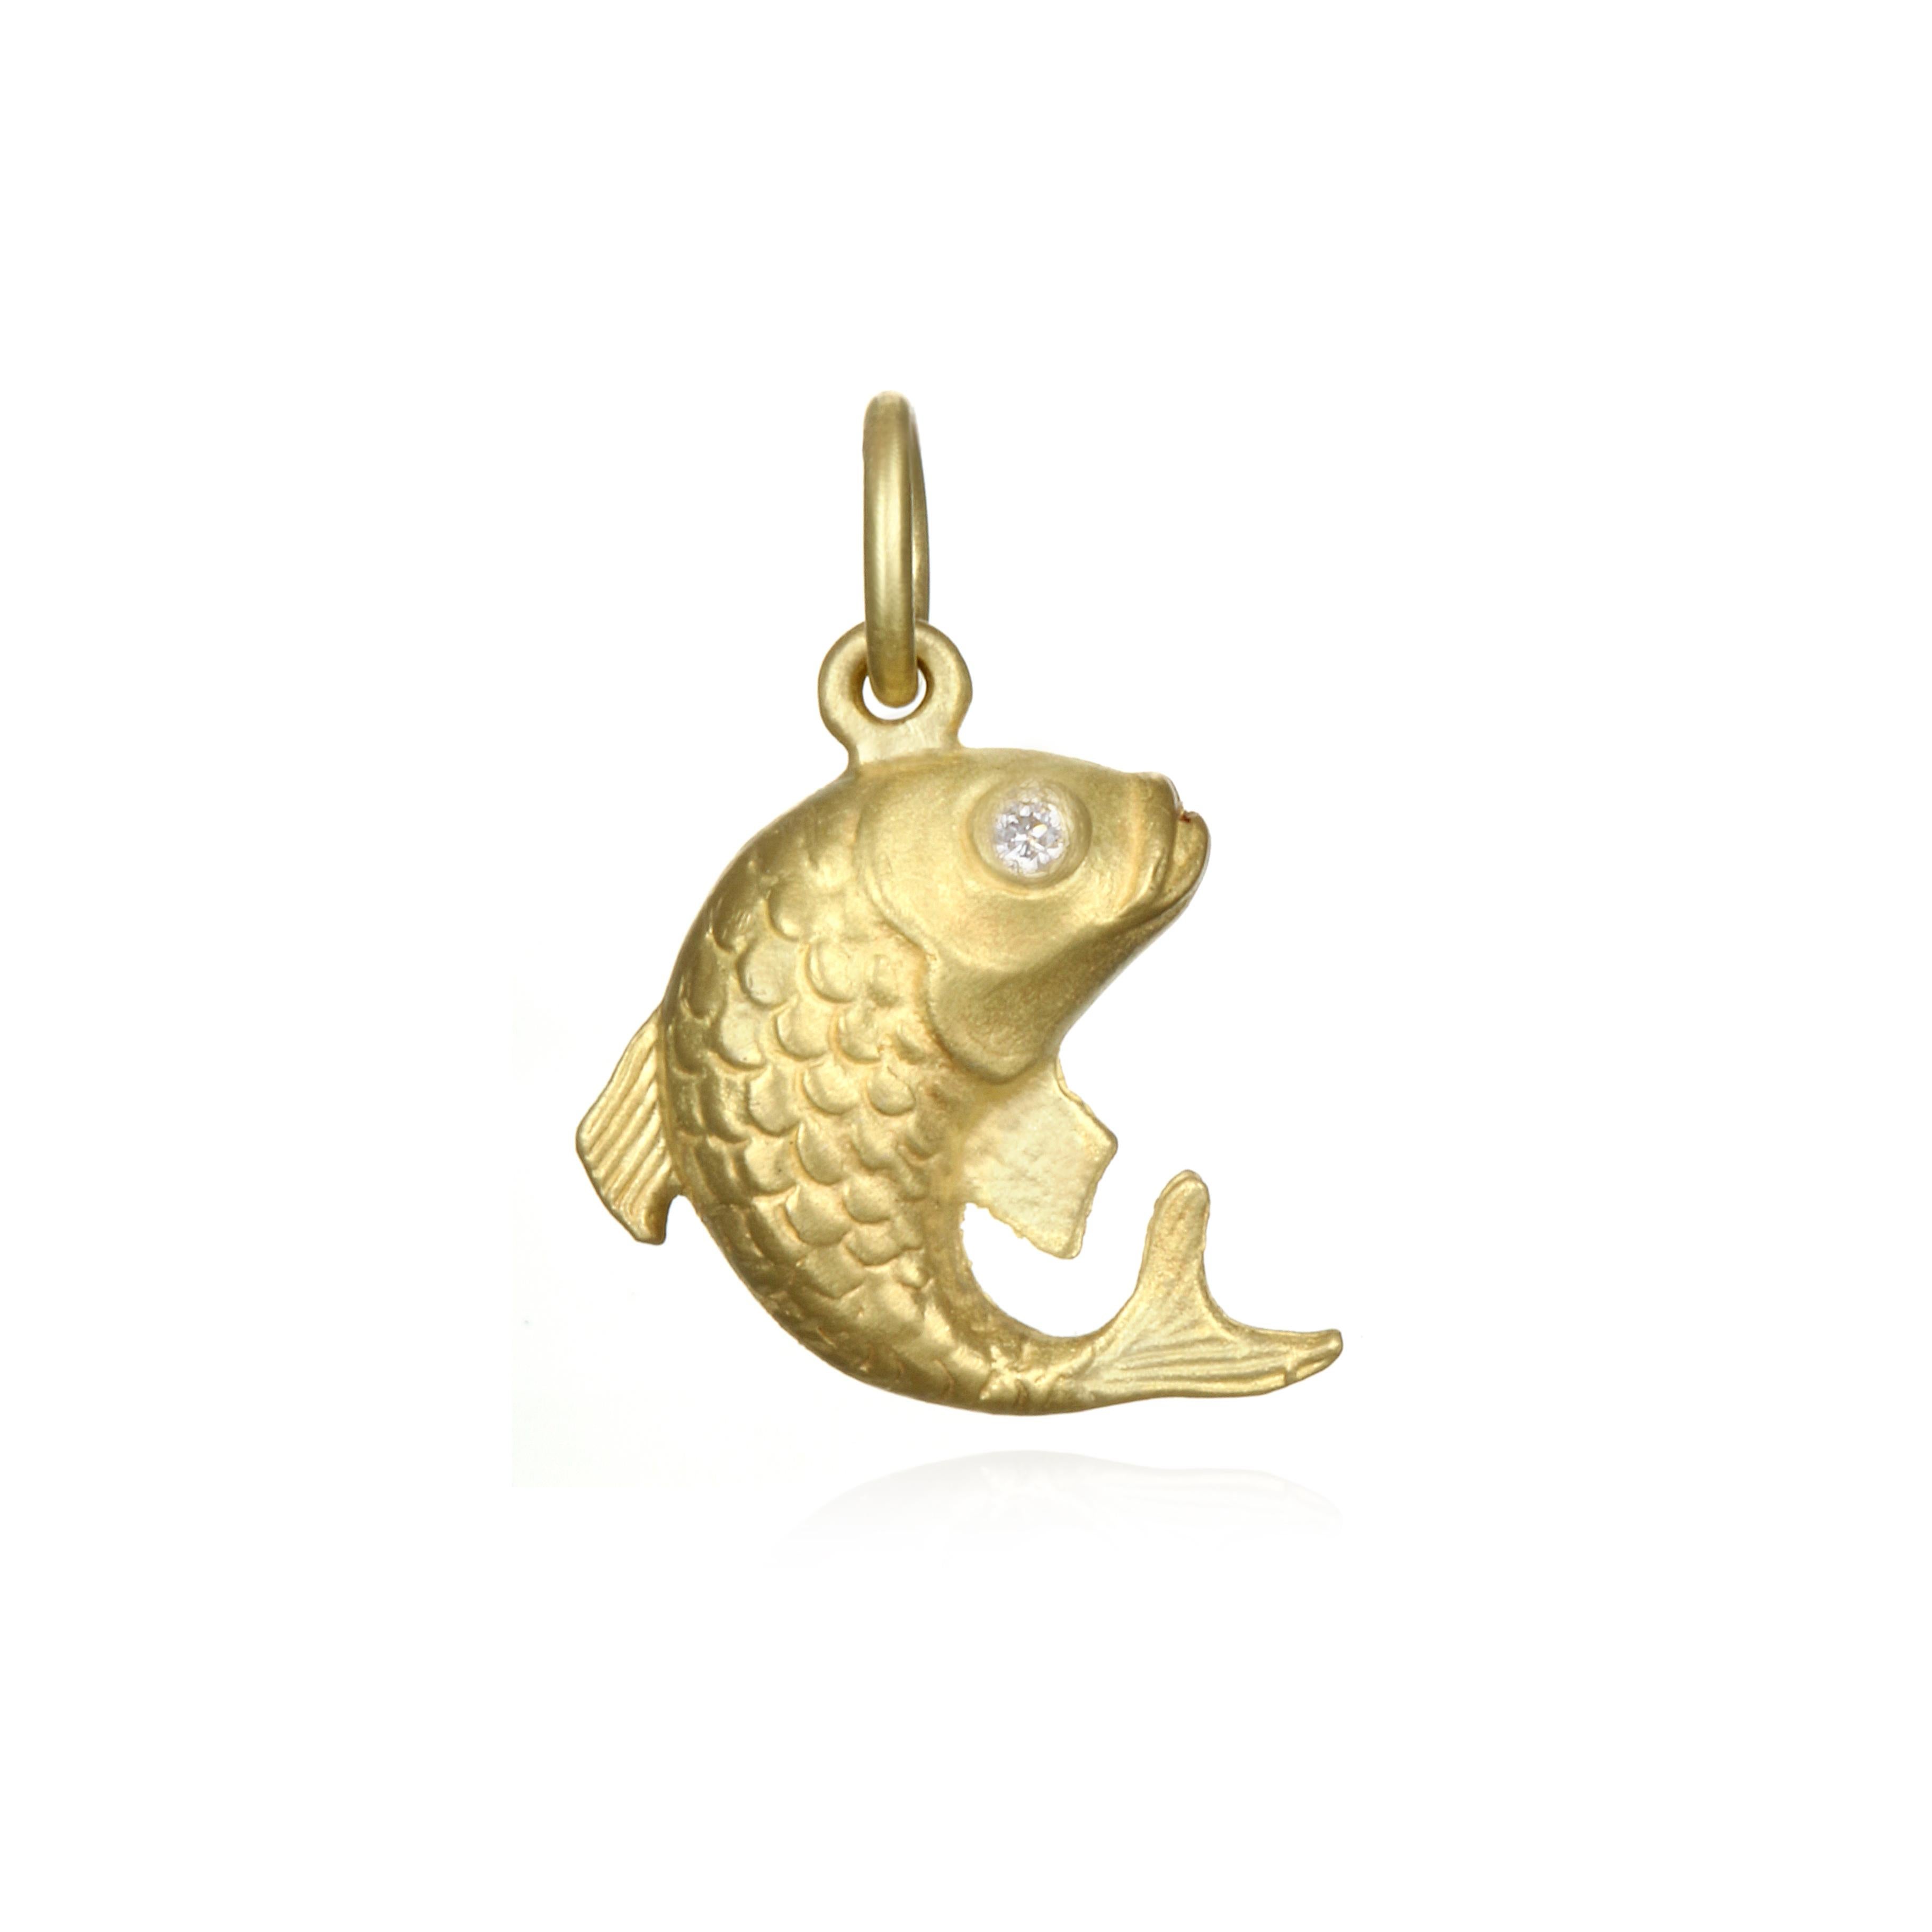 For courage, achievement, and strength - This beautiful Koi Charm is crafted in solid 18K green gold with two diamond eyes.  The cable chain is 16-18